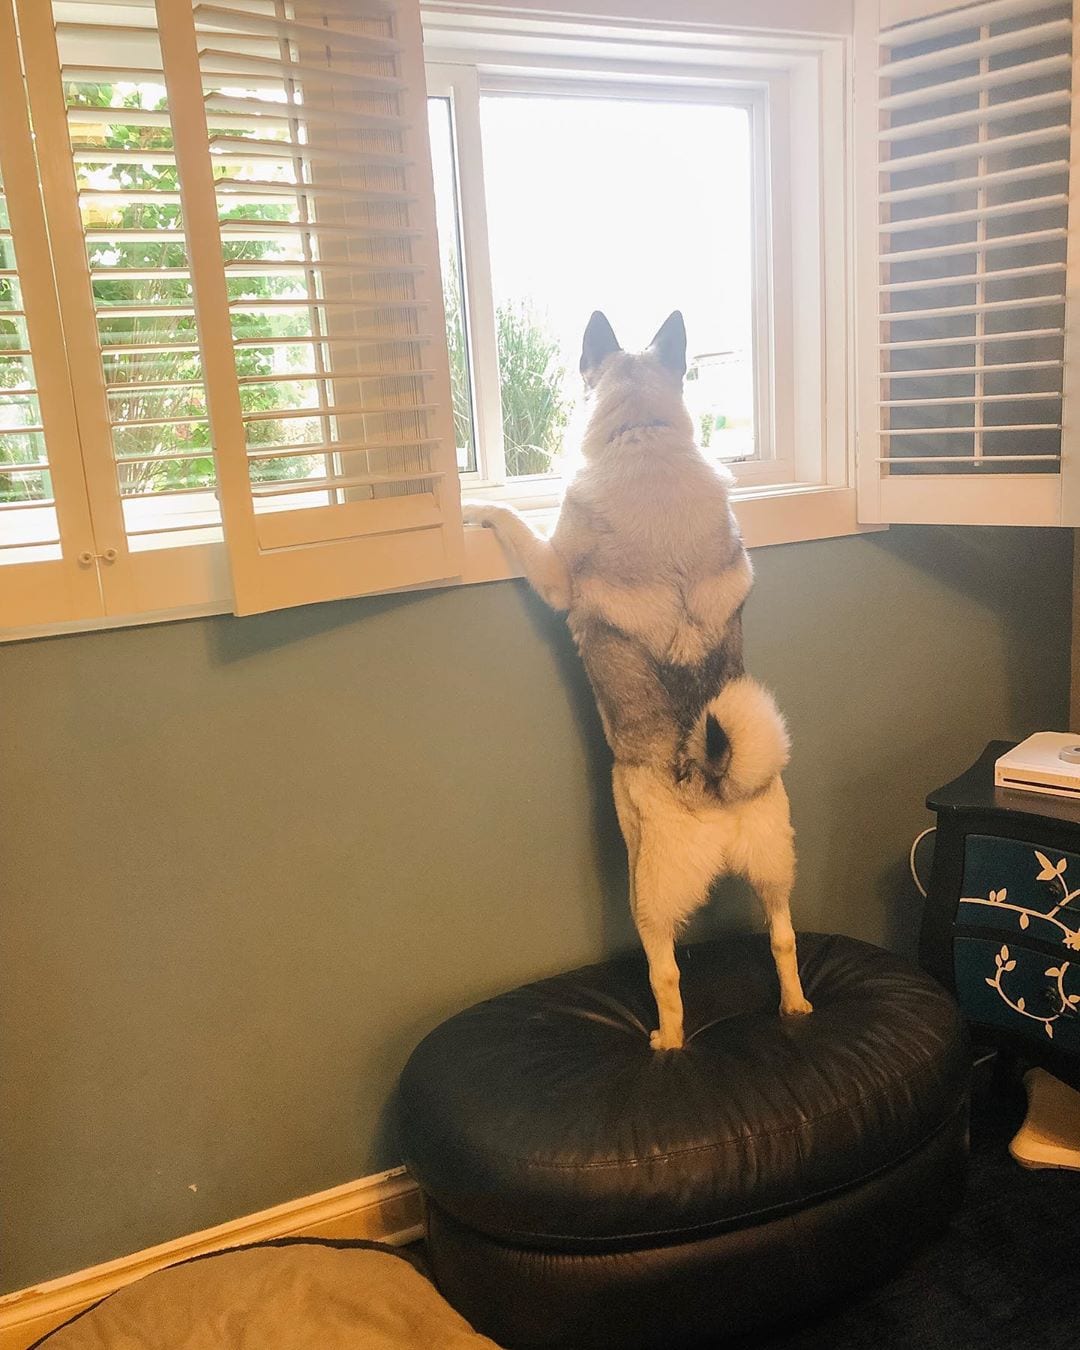 A Norwegian Elkhound standing up on the chair while looking outside the window